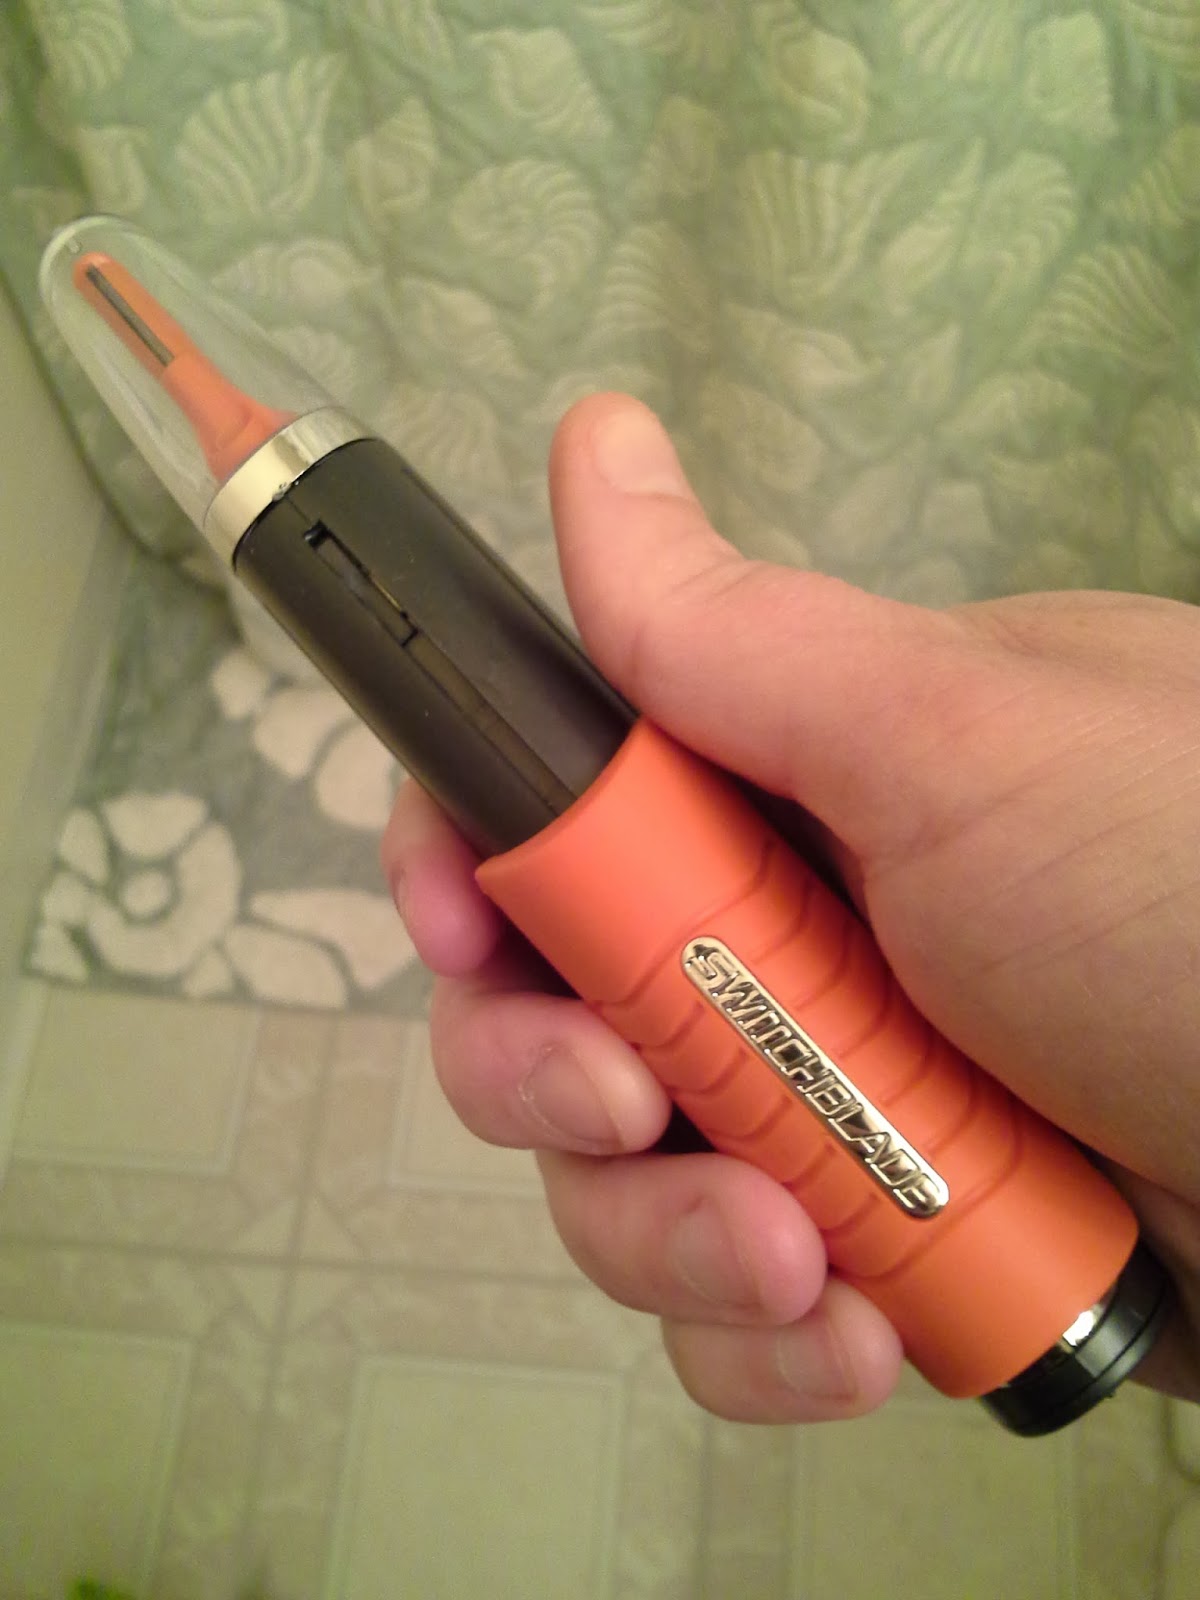 microtouch switchblade trimmer review